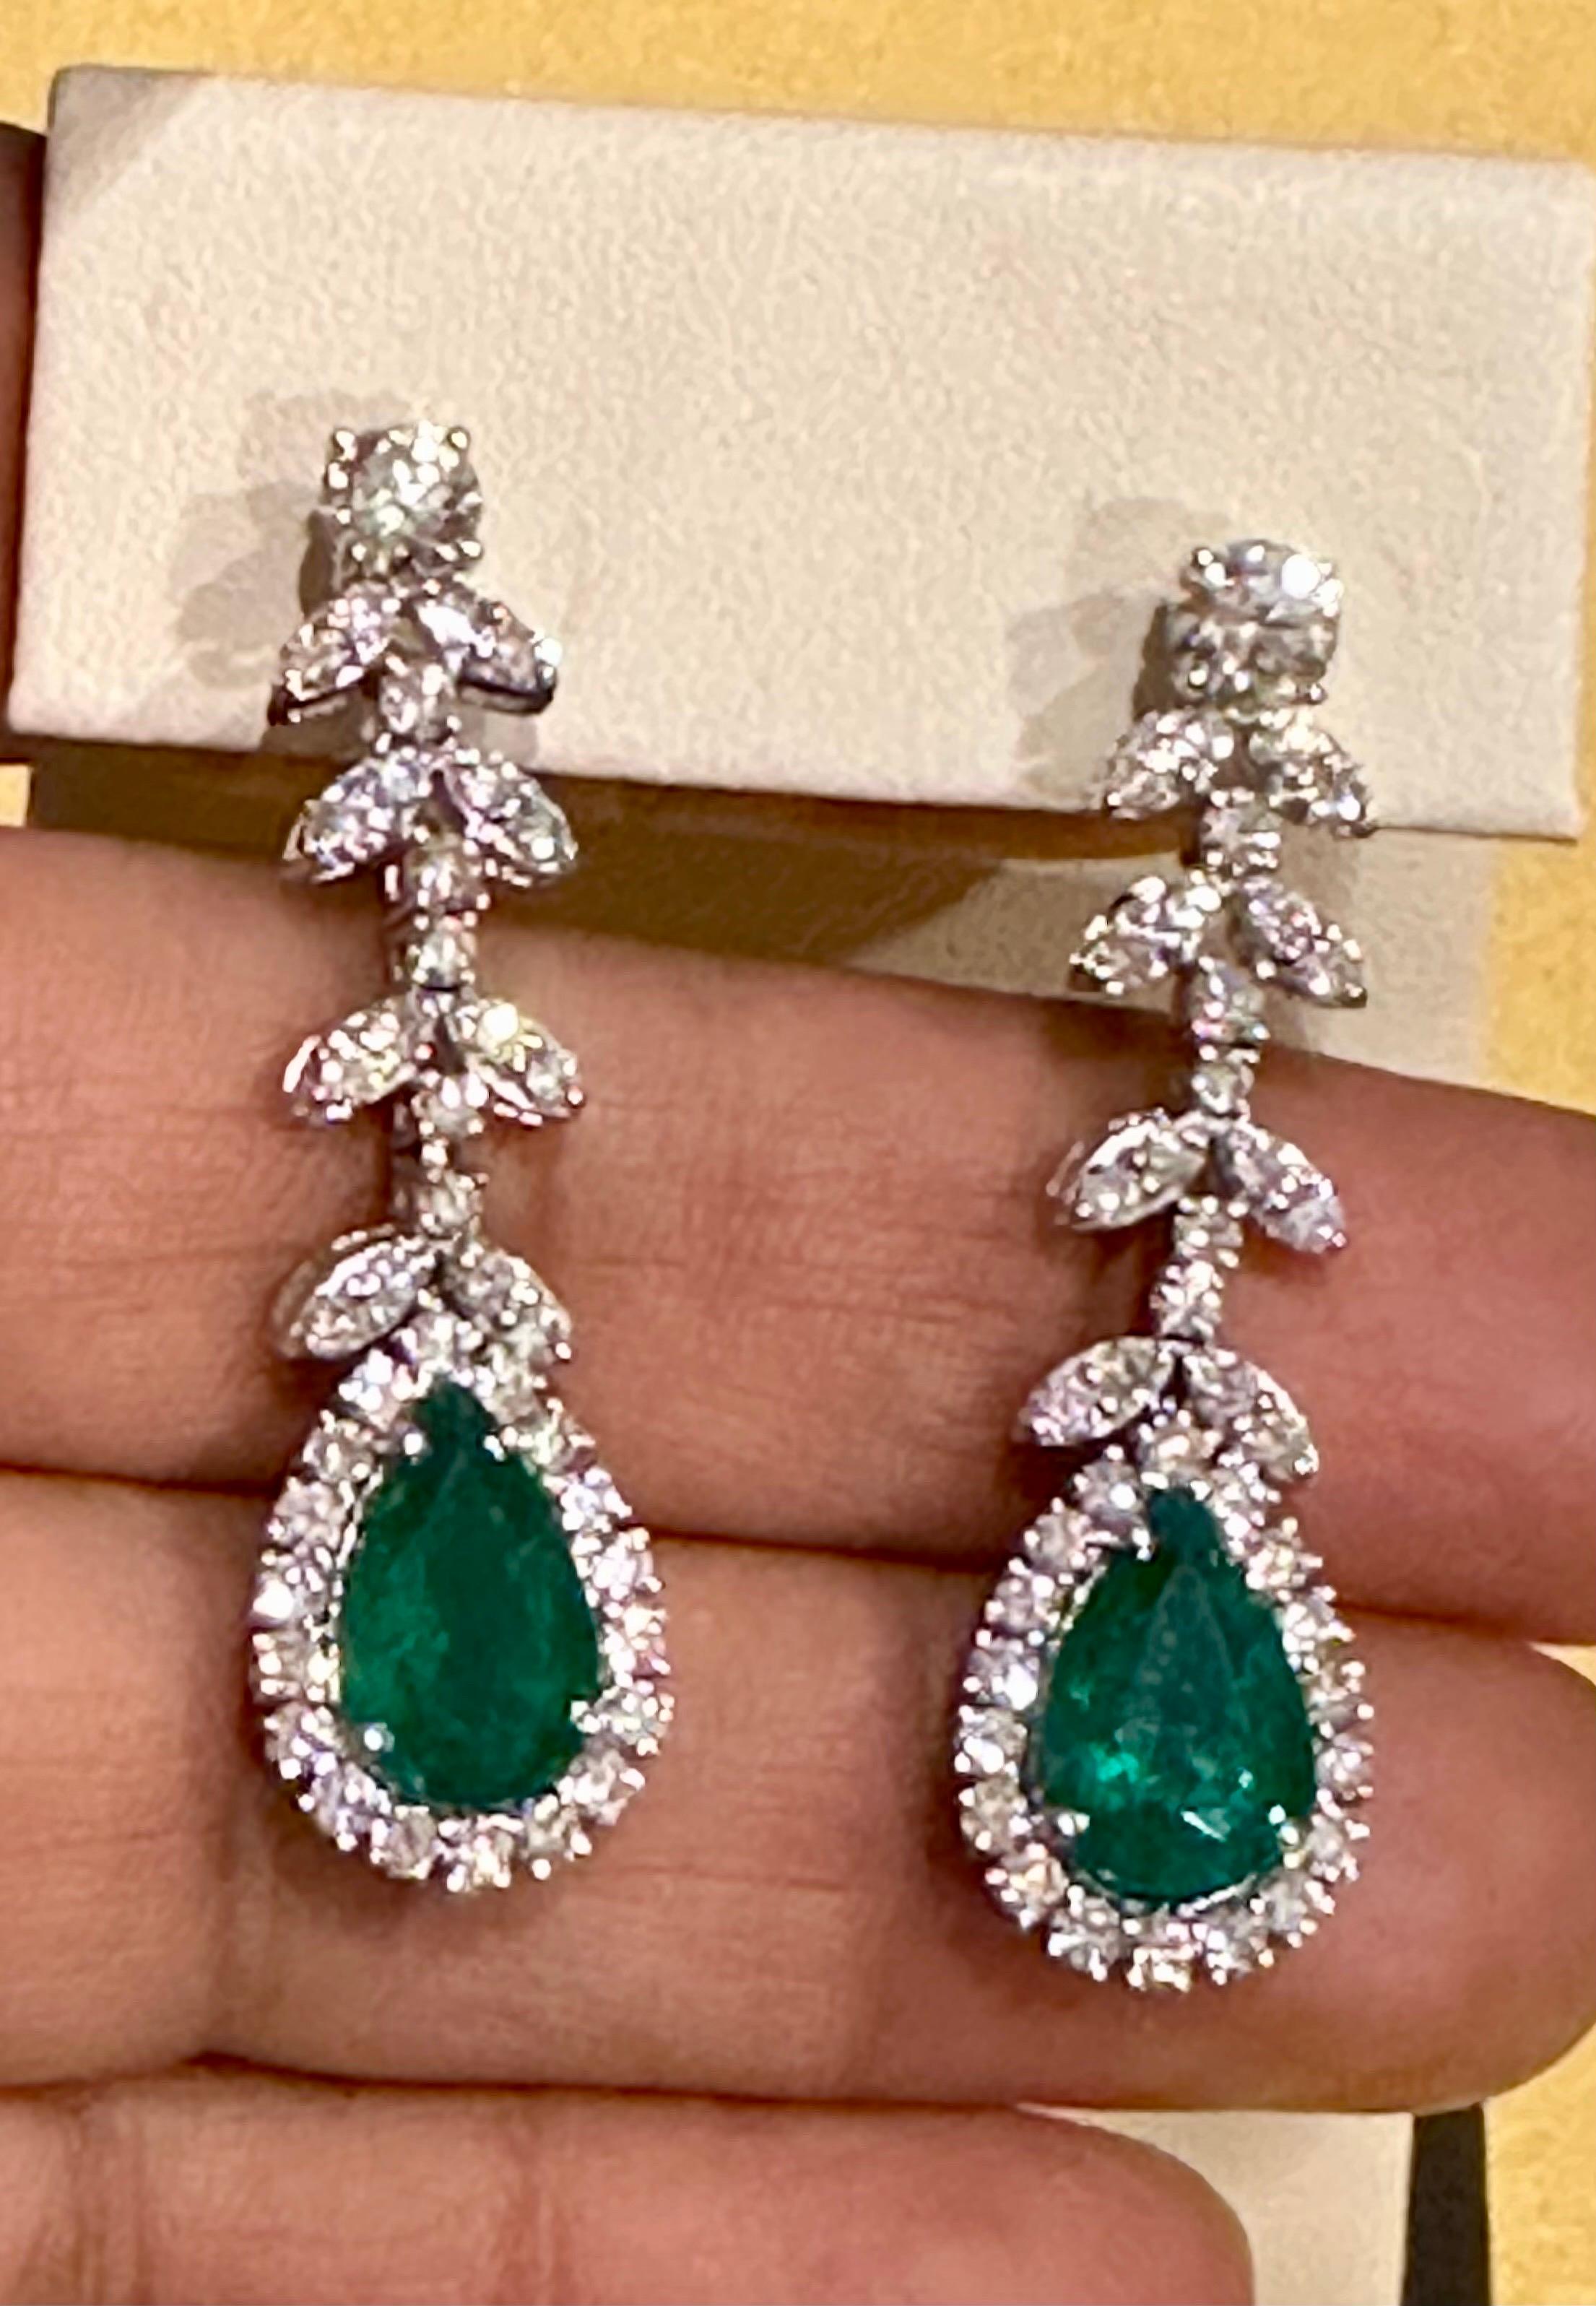 75 Ct Zambian Emerald and 30 Ct Diamond Necklace and Earring Bridal Suite For Sale 6